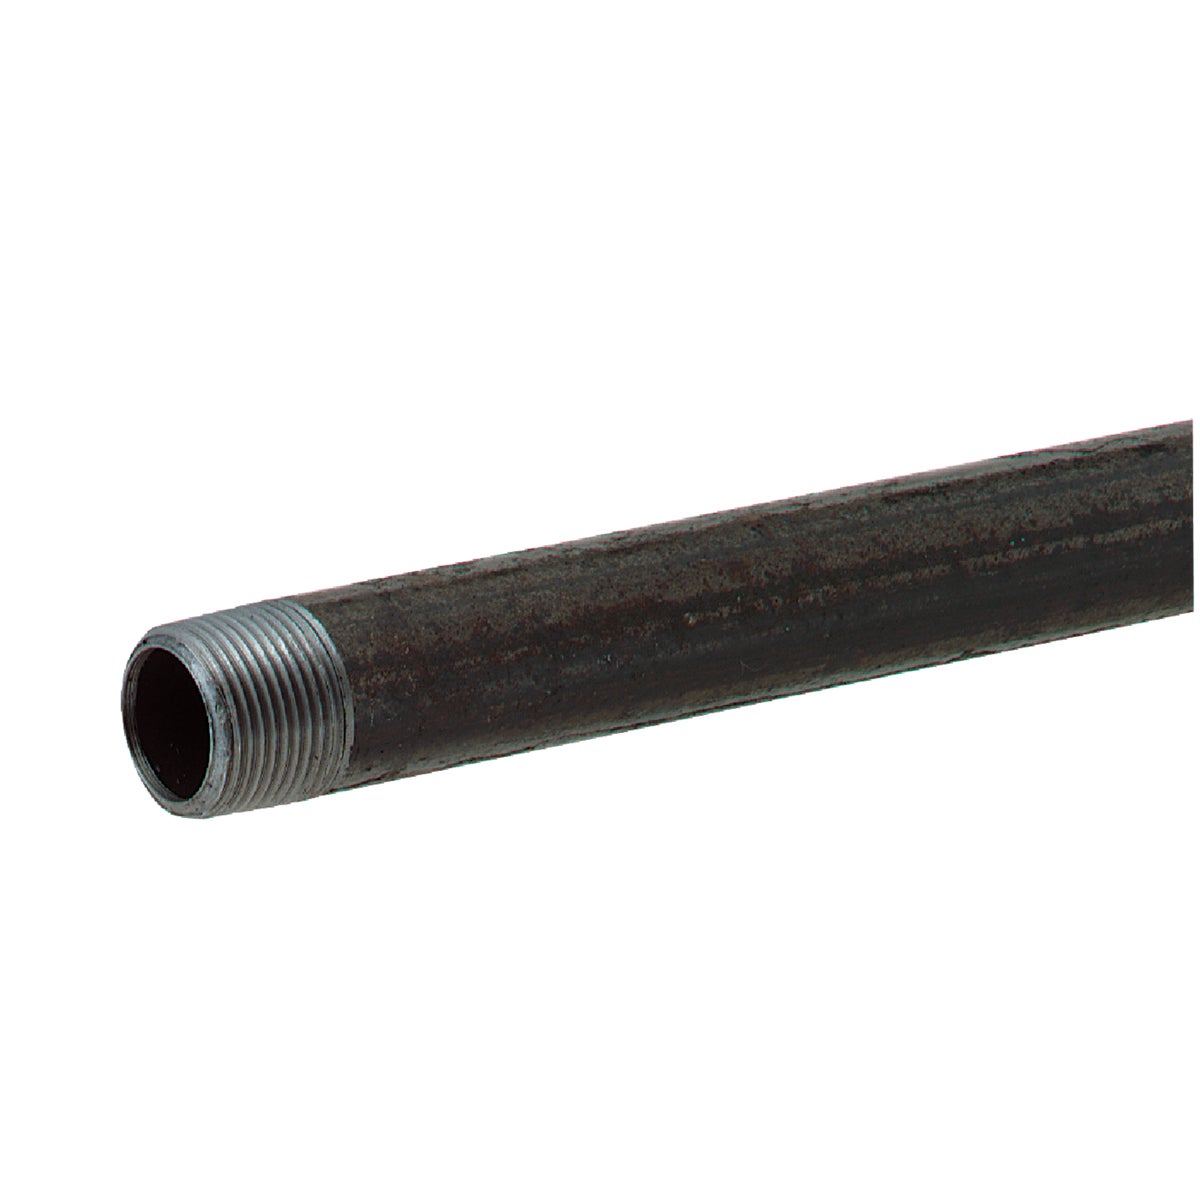 1-1/4X36 BLK RDI-CT PIPE